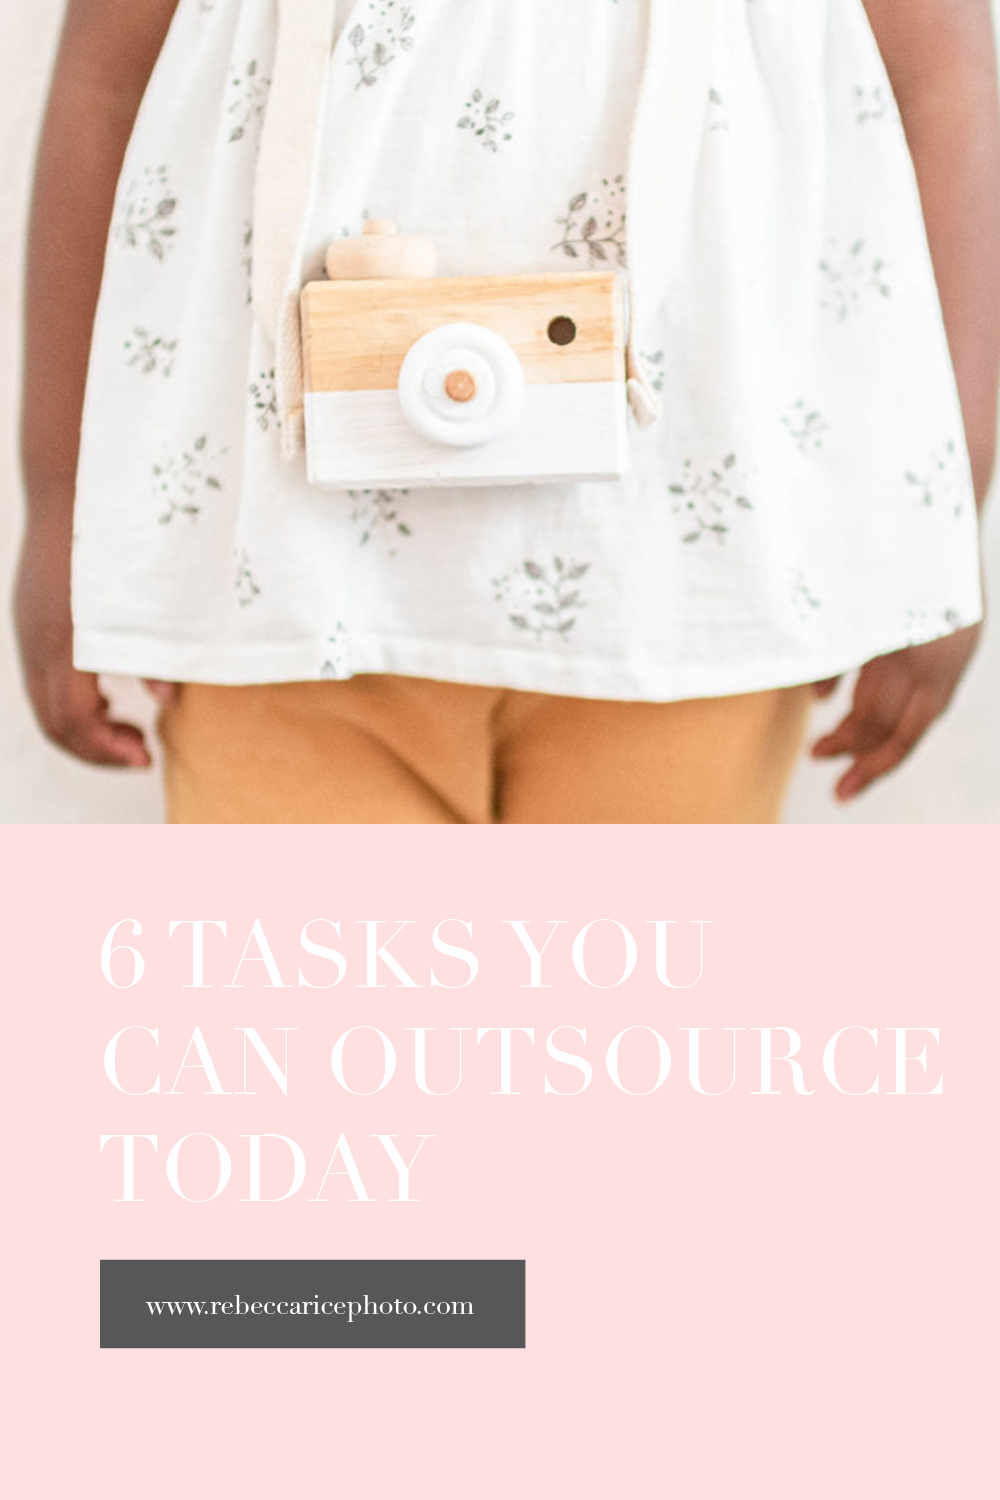 6 Tasks you can outsource today as a small business owner